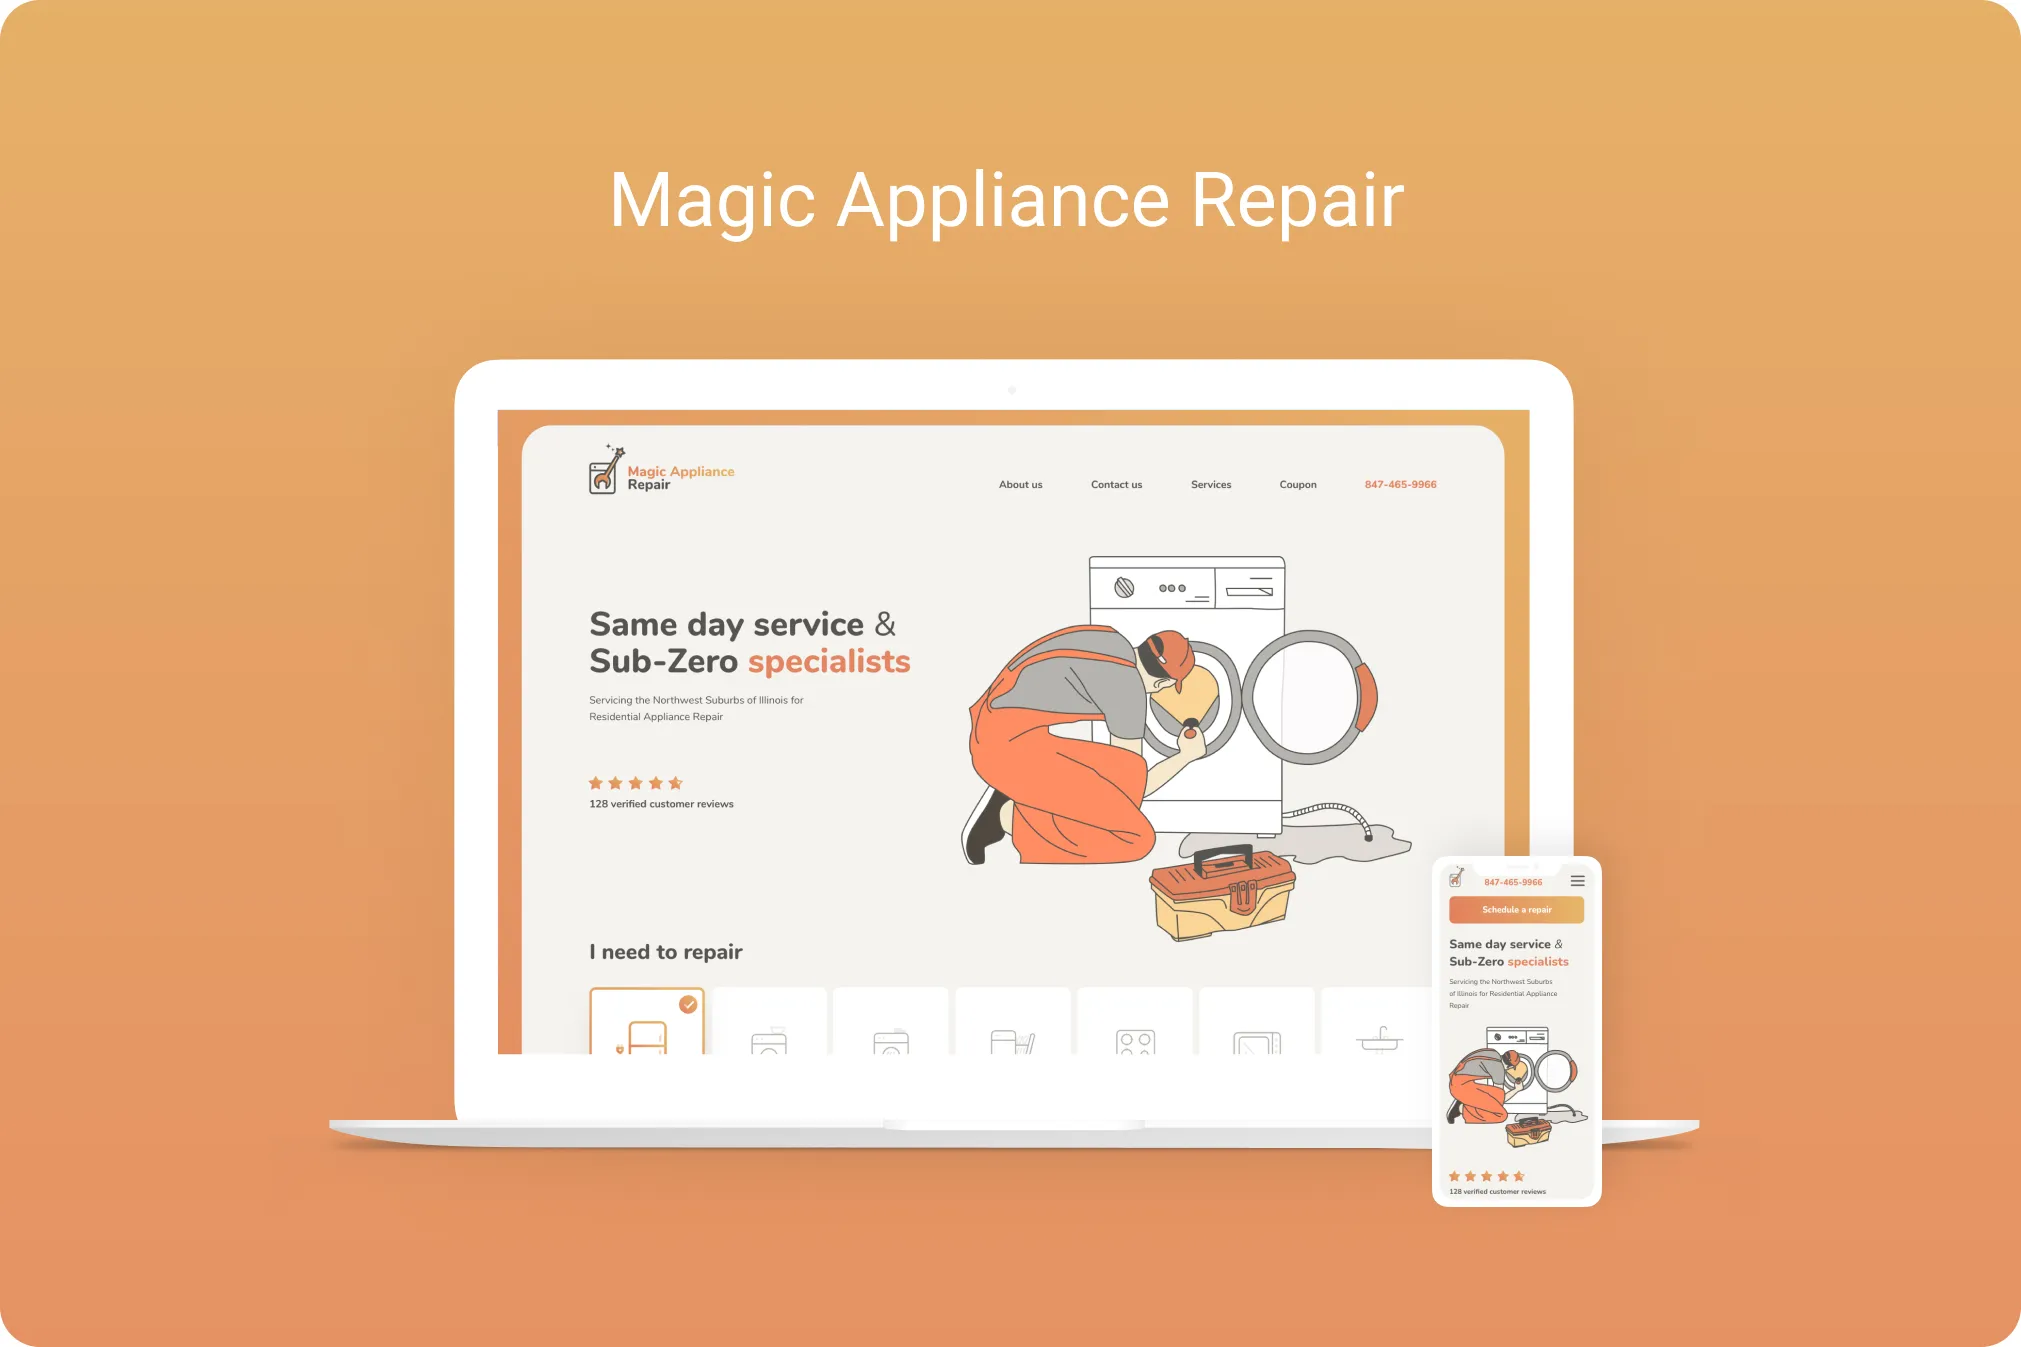 Case Study - Residential Appliance Repair Services